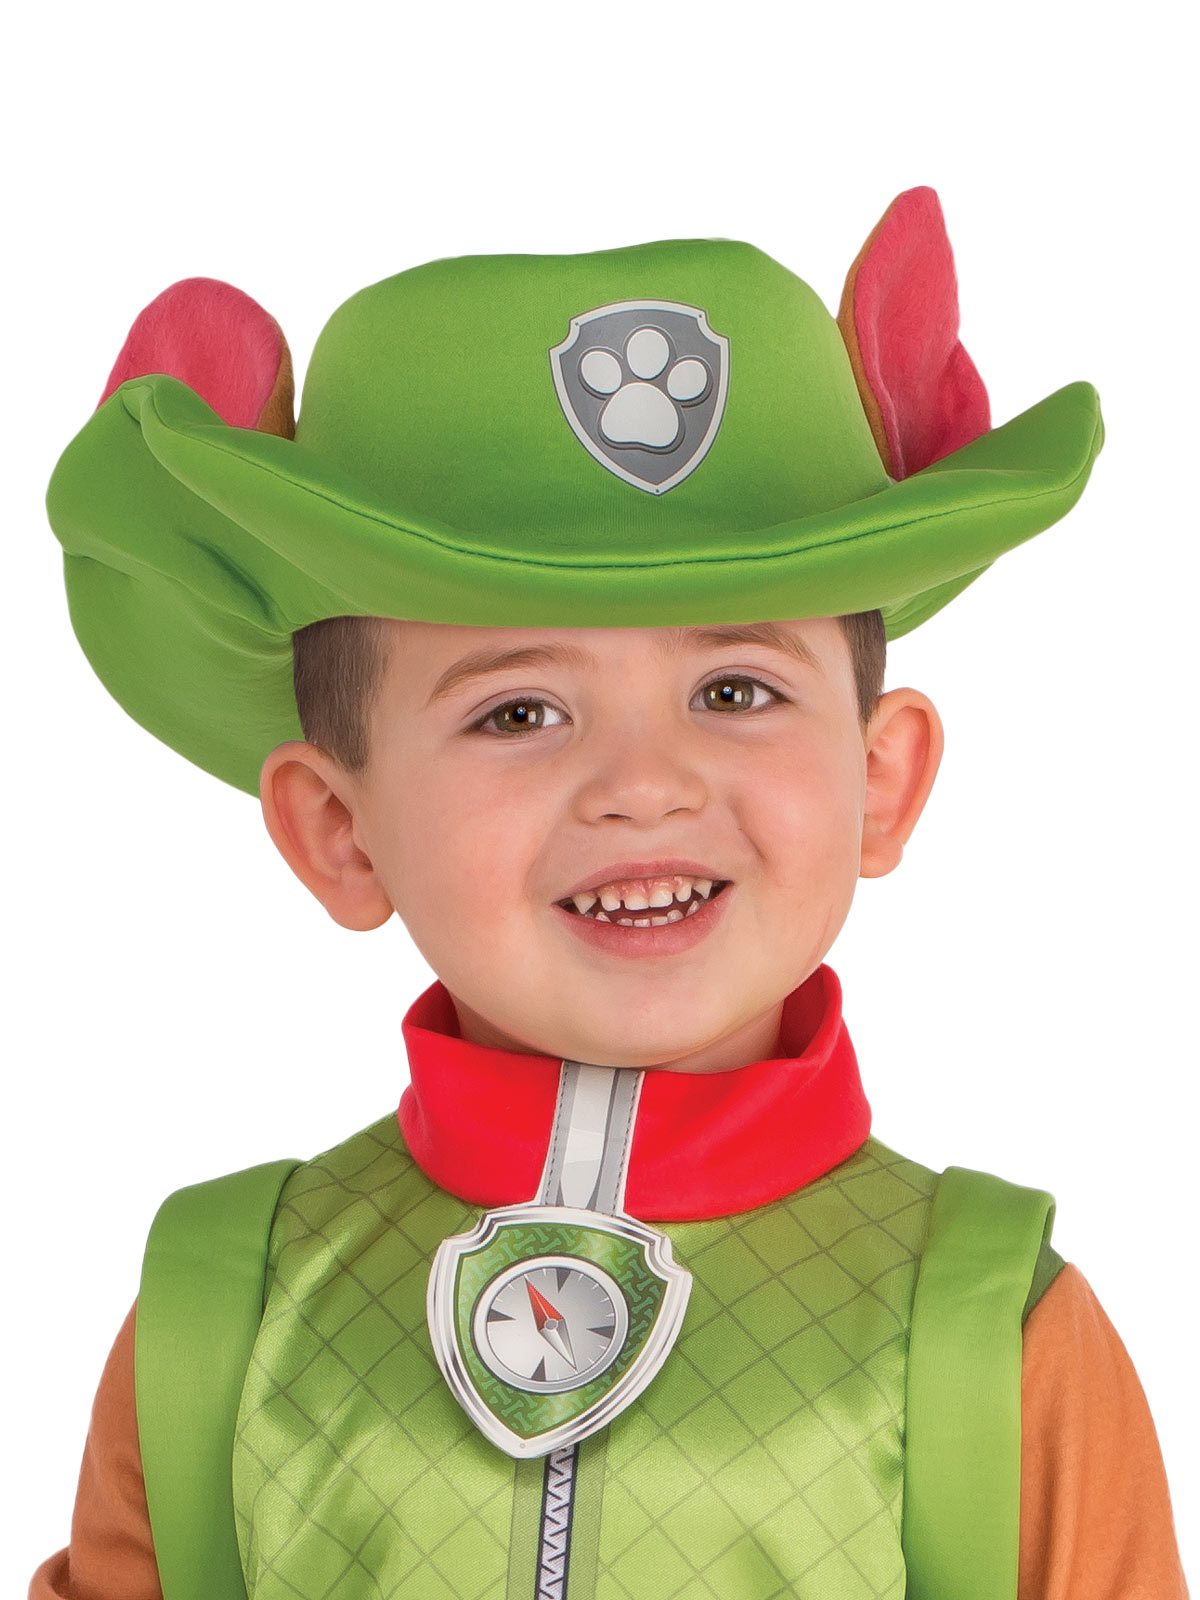 Costume for Toddlers and Kids - Nickelodeon Paw Patrol | World NZ